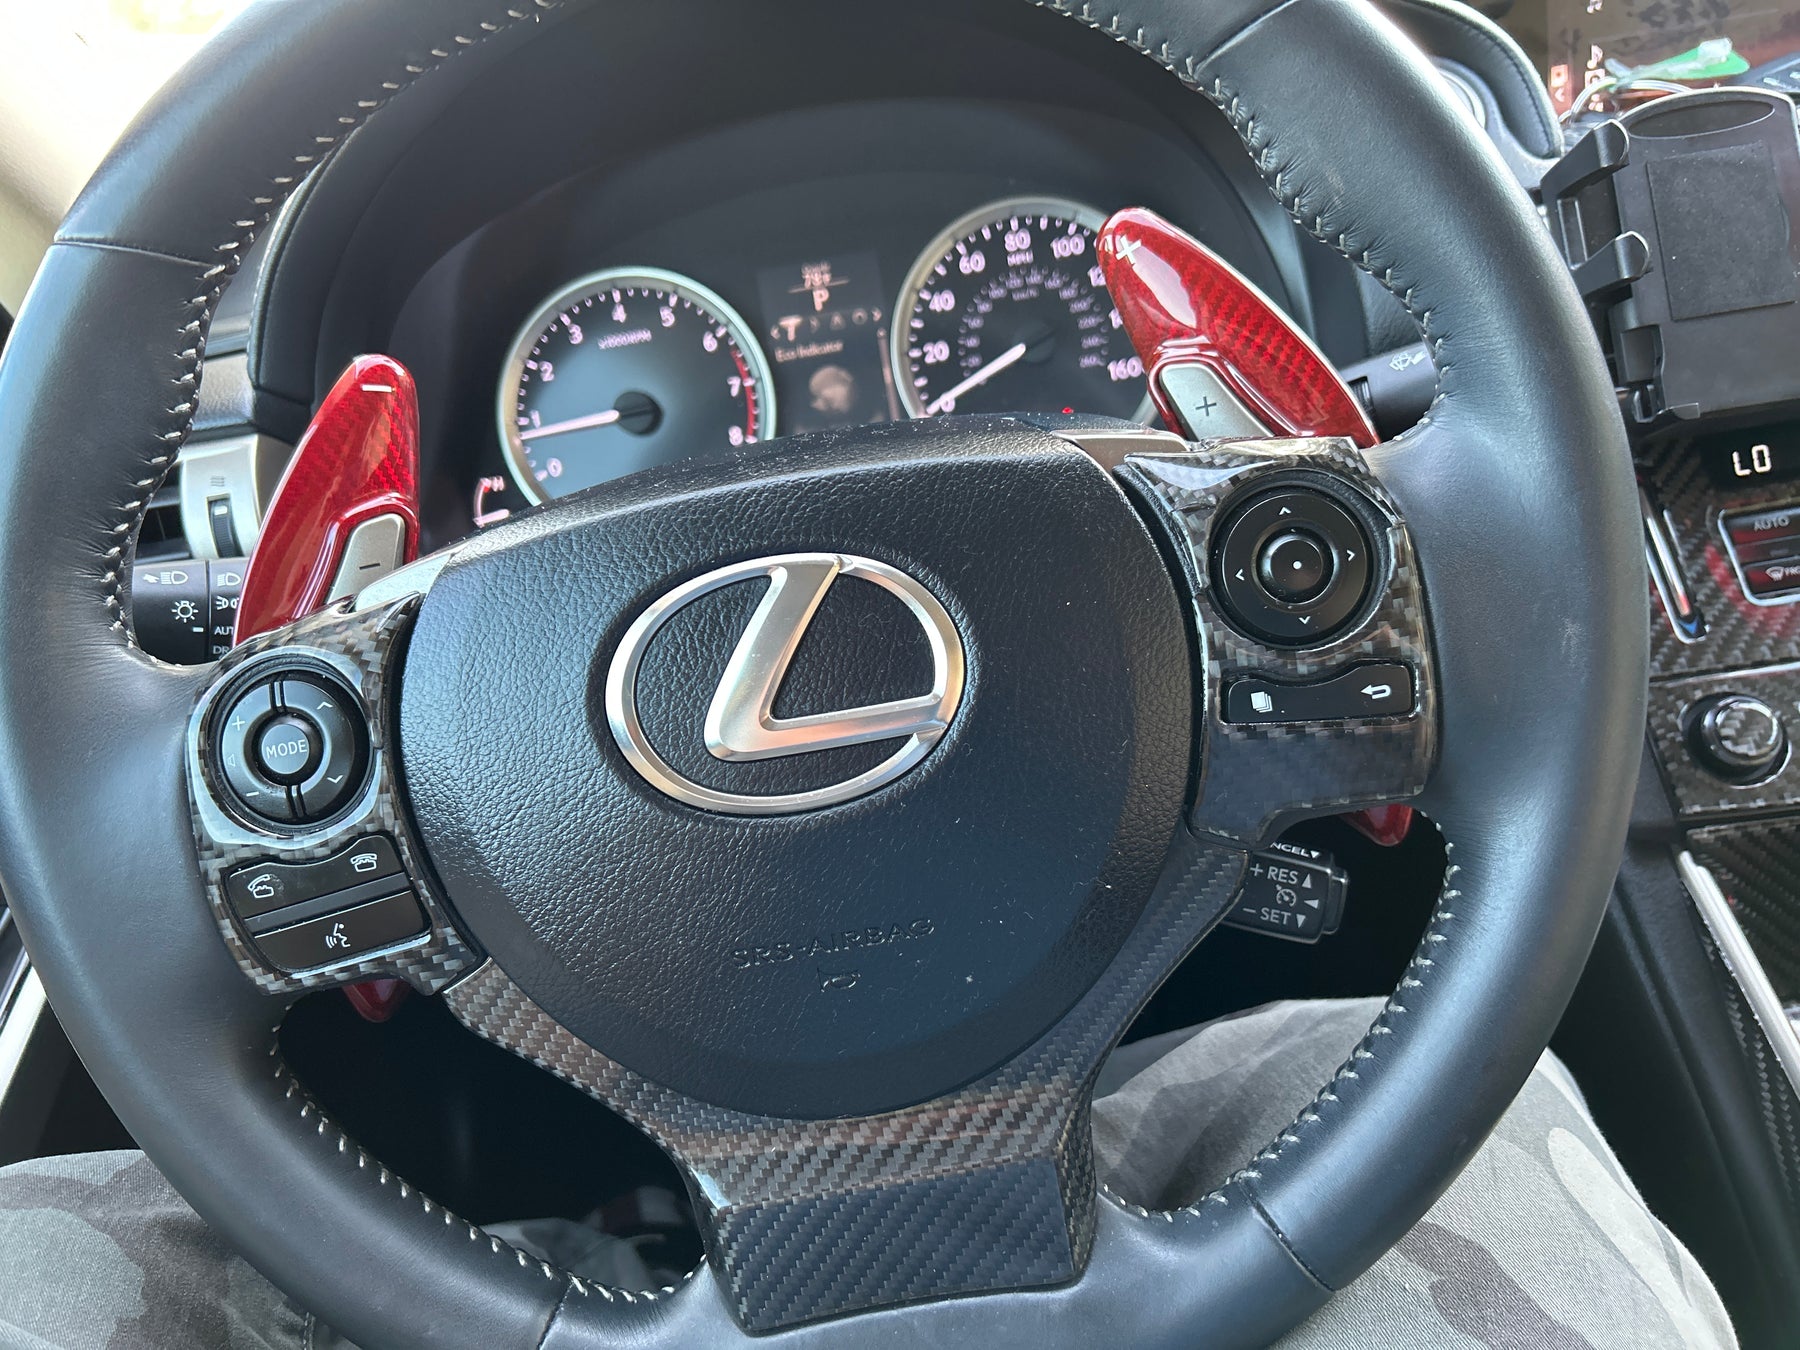 2014 Lexus IS250  Installed High Gloss Red Genuine Carbon Fiber Steering Wheel Larger Paddle Shifter Extension Covers